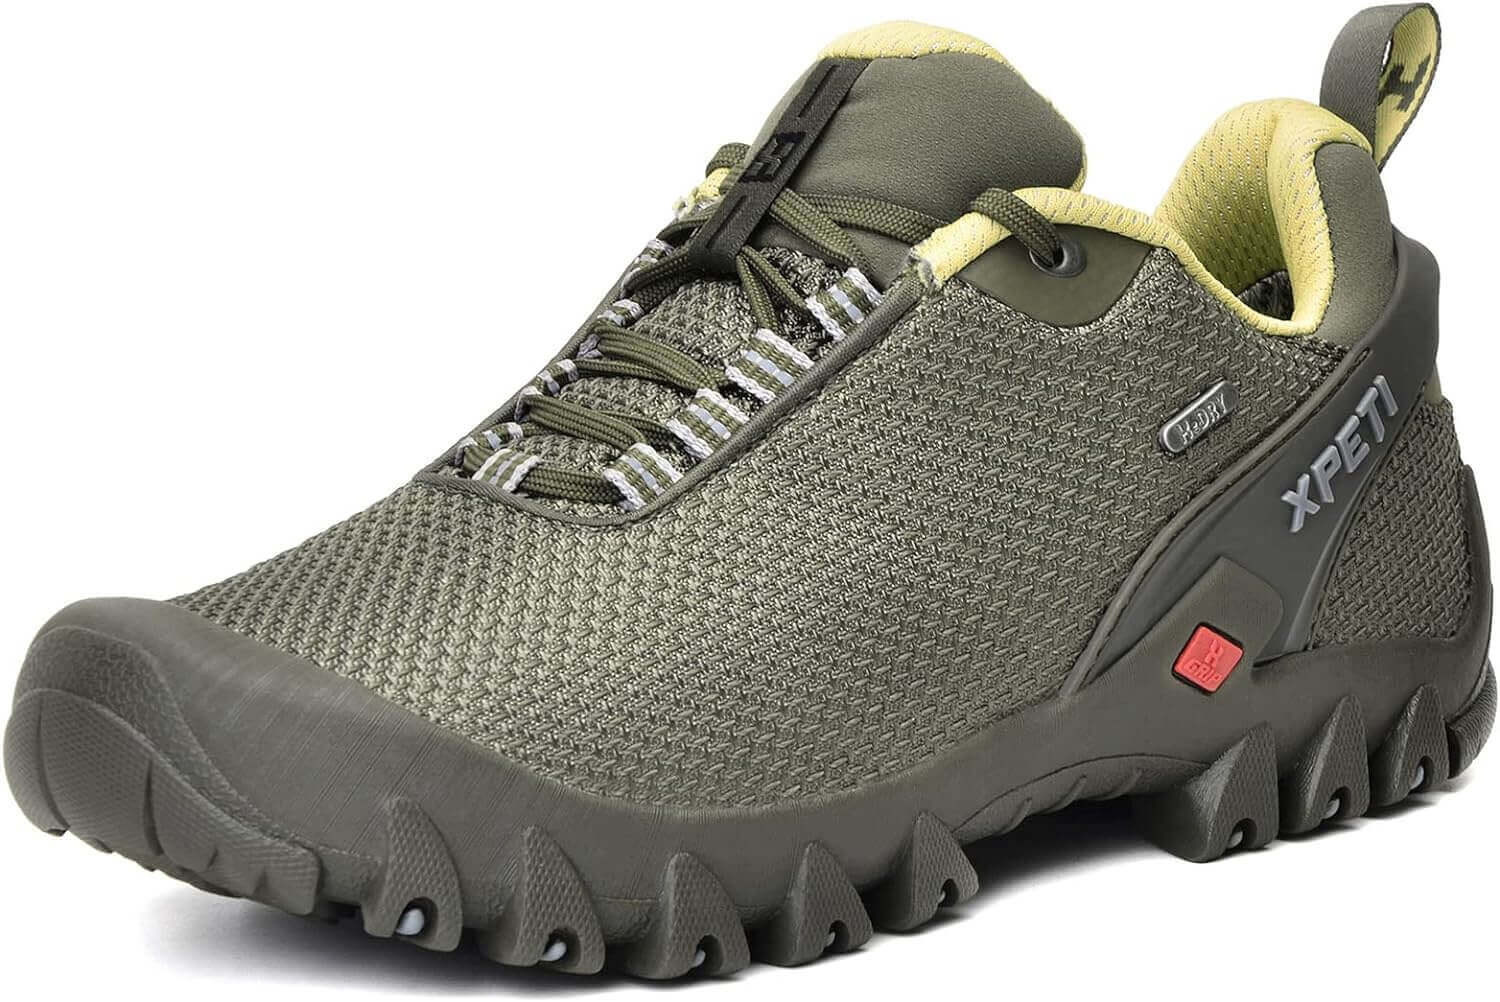 Shop The Latest >XPETI Men’s Terra Low Hiking Shoes > *Only $53.99*> From The Top Brand > *XPETIl* > Shop Now and Get Free Shipping On Orders Over $45.00 >*Shop Earth Foot*